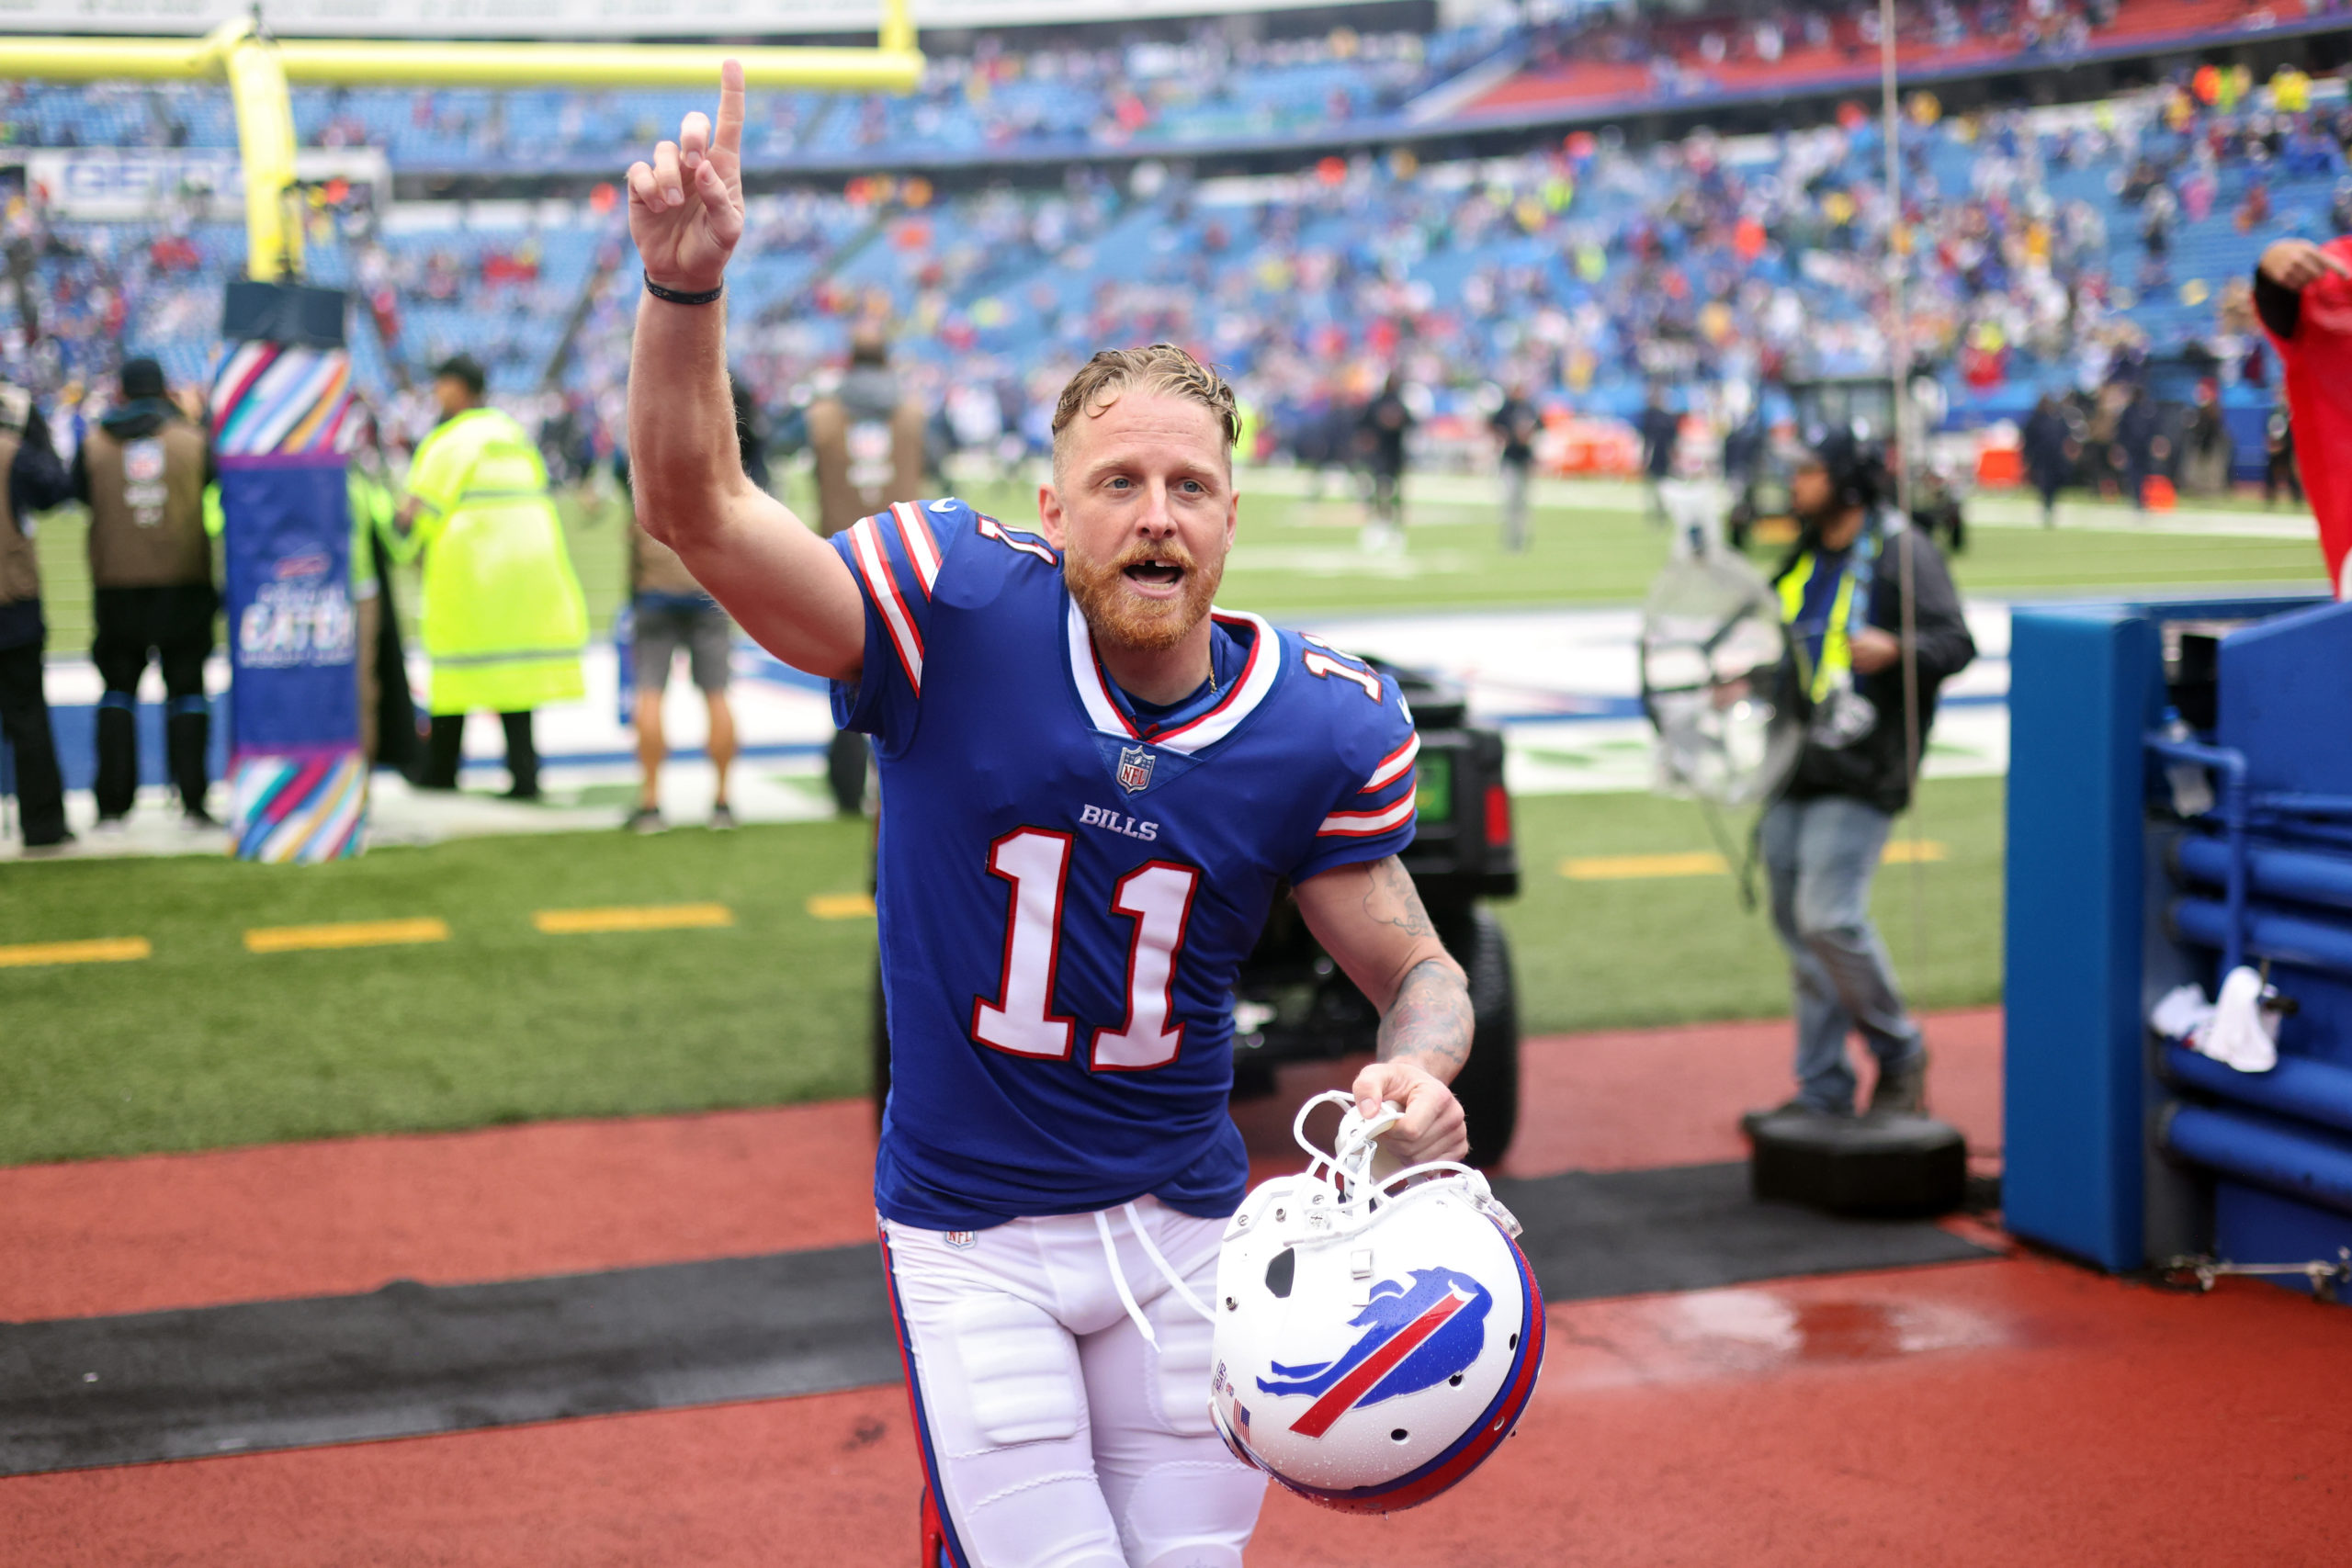 ORCHARD PARK, NEW YORK - OCTOBER 03: Cole Beasley #11 of the Buffalo Bills acknowledges the fans as he leaves the field after the Bills defeated the Texans 40-0 at Highmark Stadium on October 03, 2021 in Orchard Park, New York. Bryan M. Bennett/Getty Images